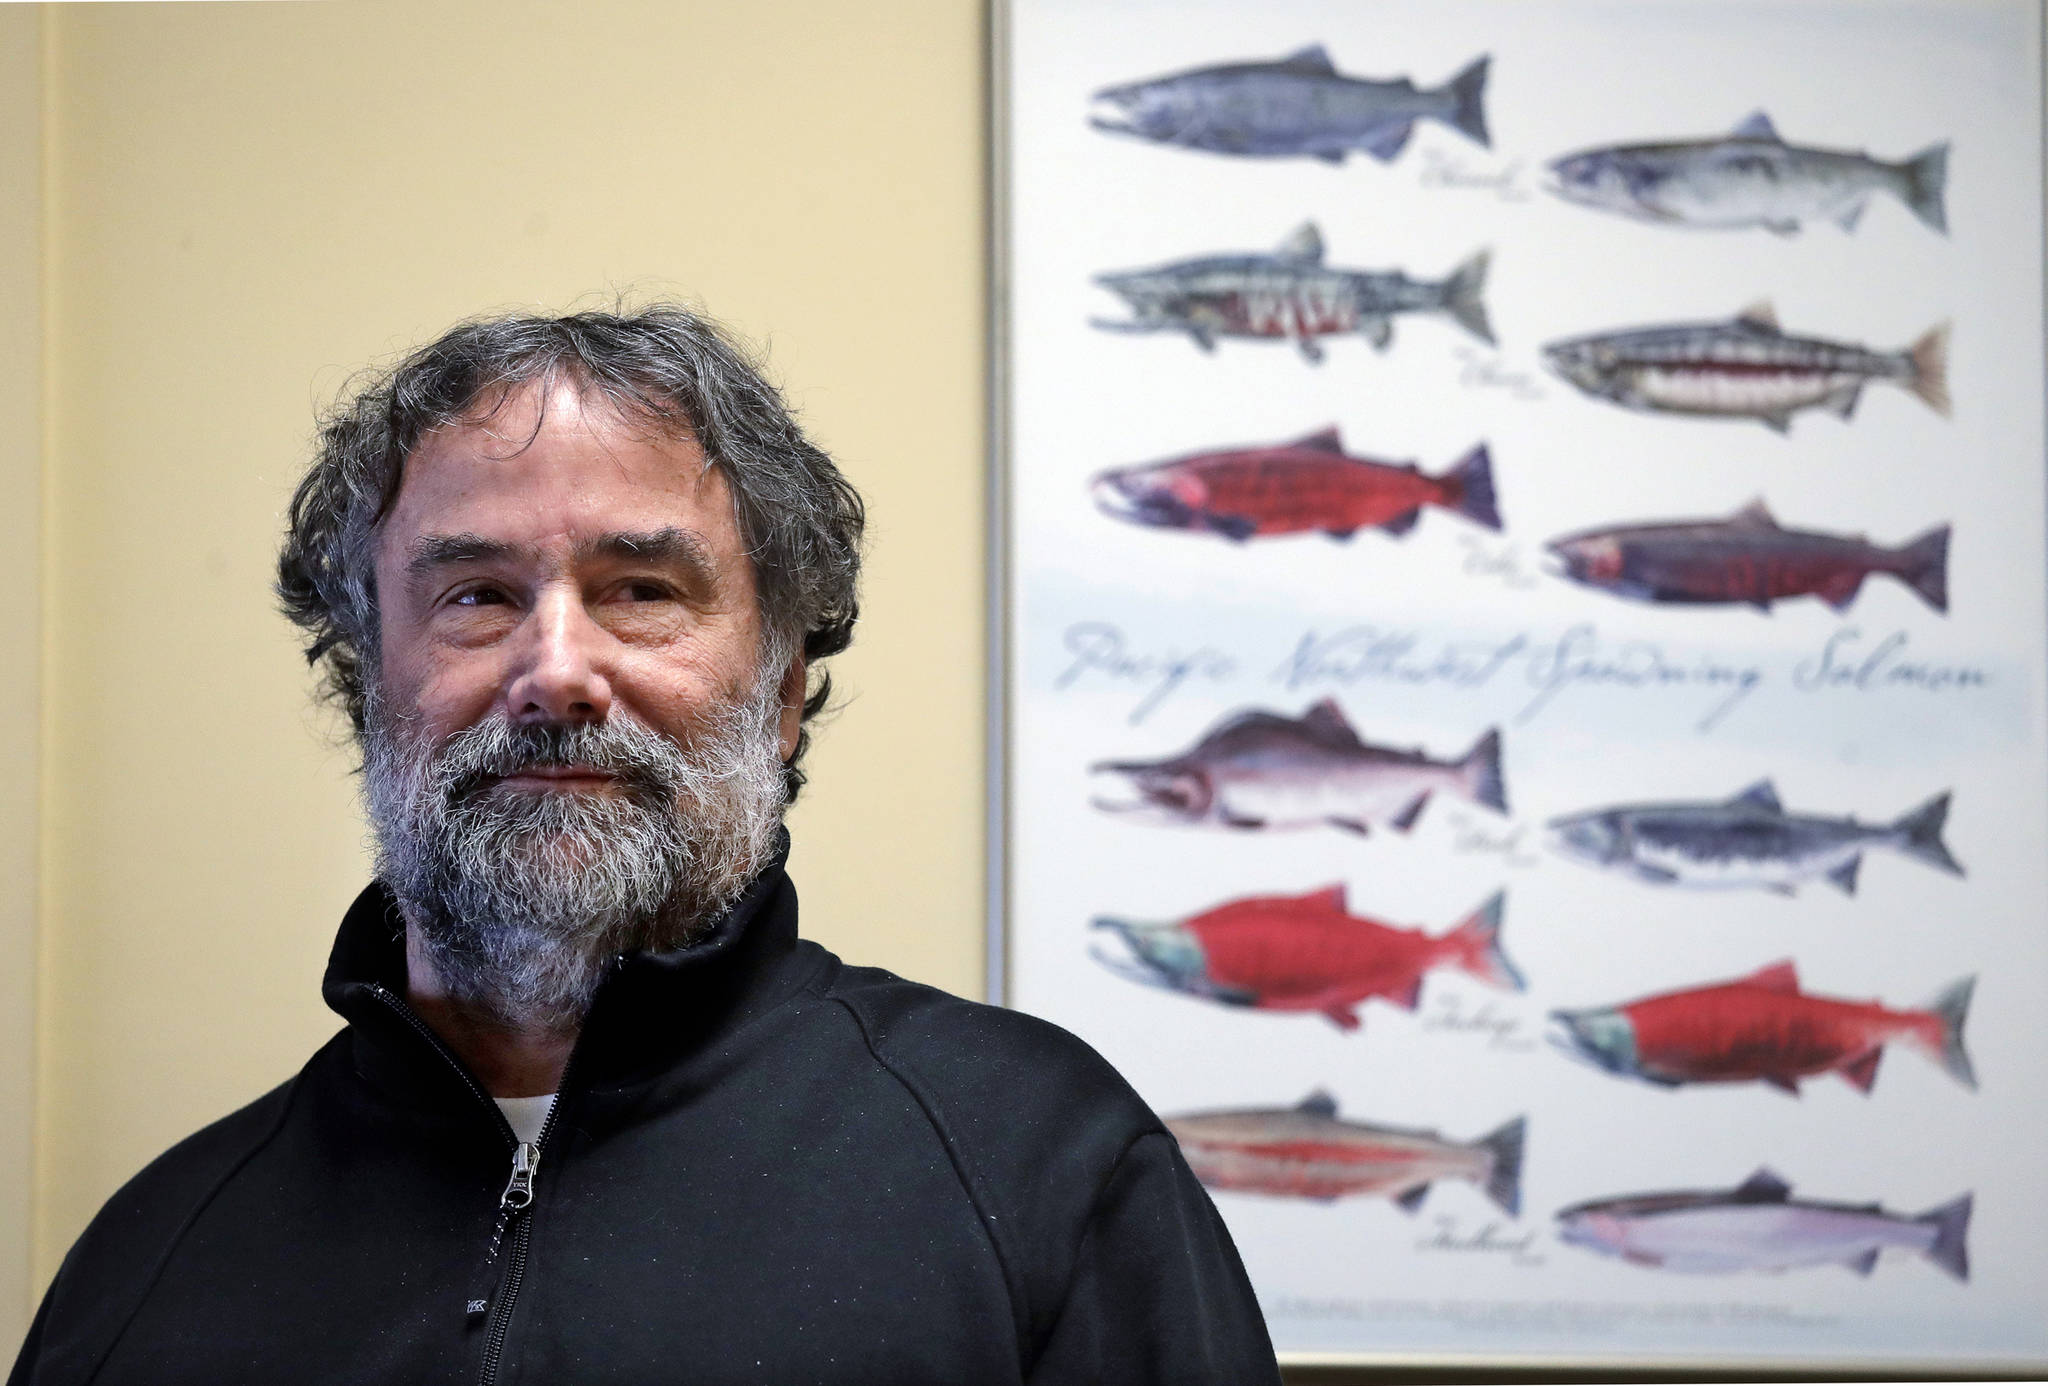 Salmon researcher Greg Ruggerone, one of a group of scientists who noticed a startling trend about the deaths of endangered southern resident orca whales, stands with a chart showing various salmon species his office Friday, Jan. 18, 2019, in Seattle. (Elaine Thompson | Associated Press)